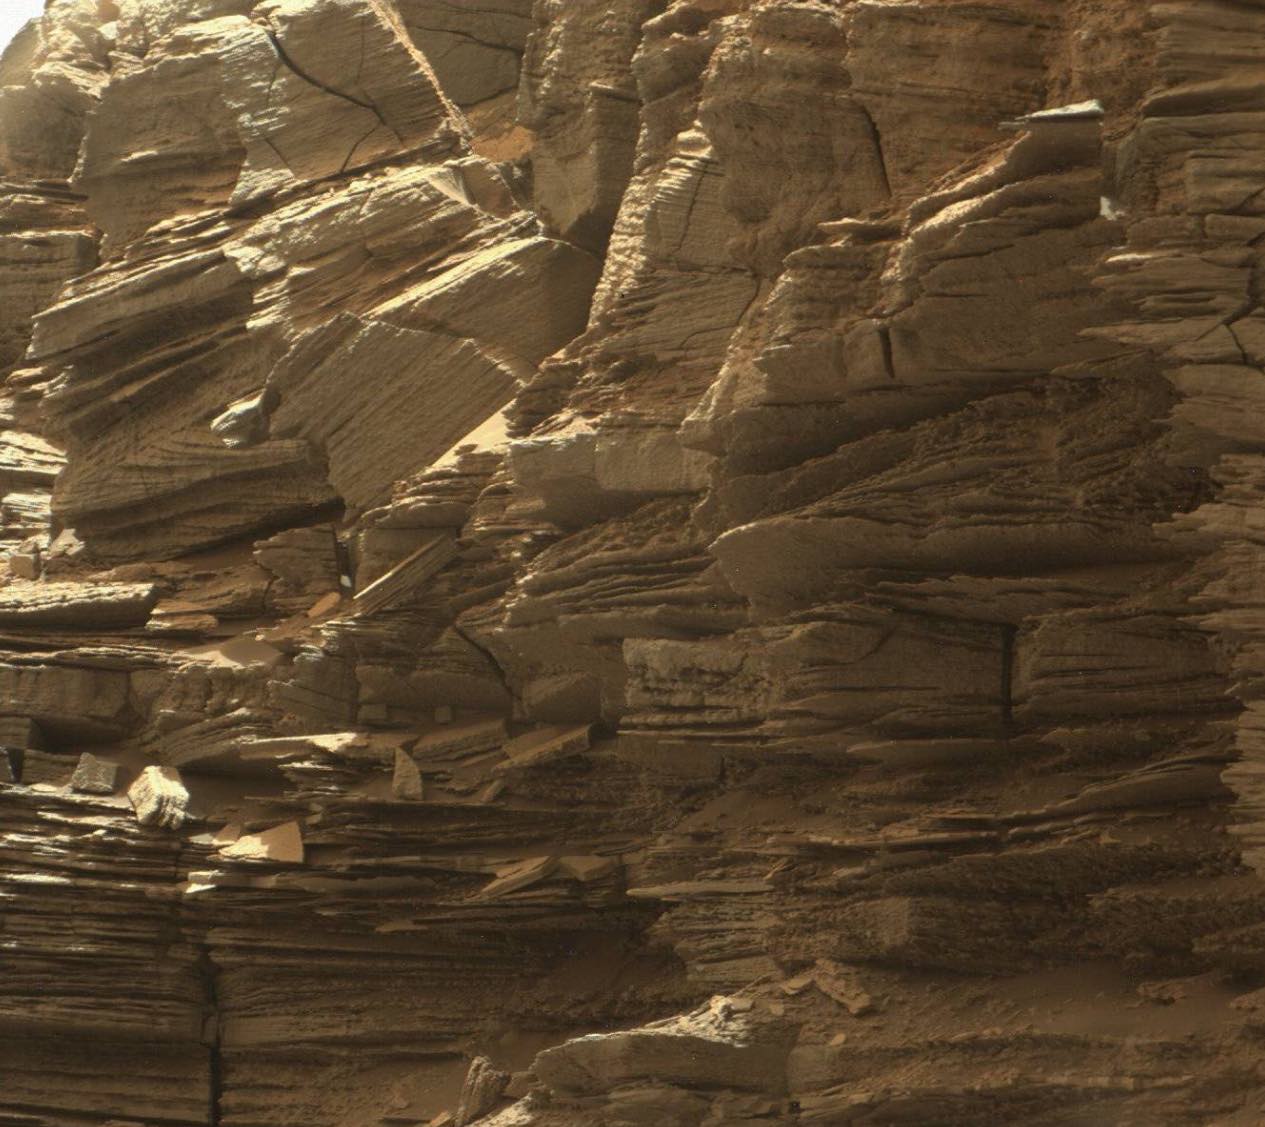 Nasa's Curiosity rover sends new images of Mars rock formations